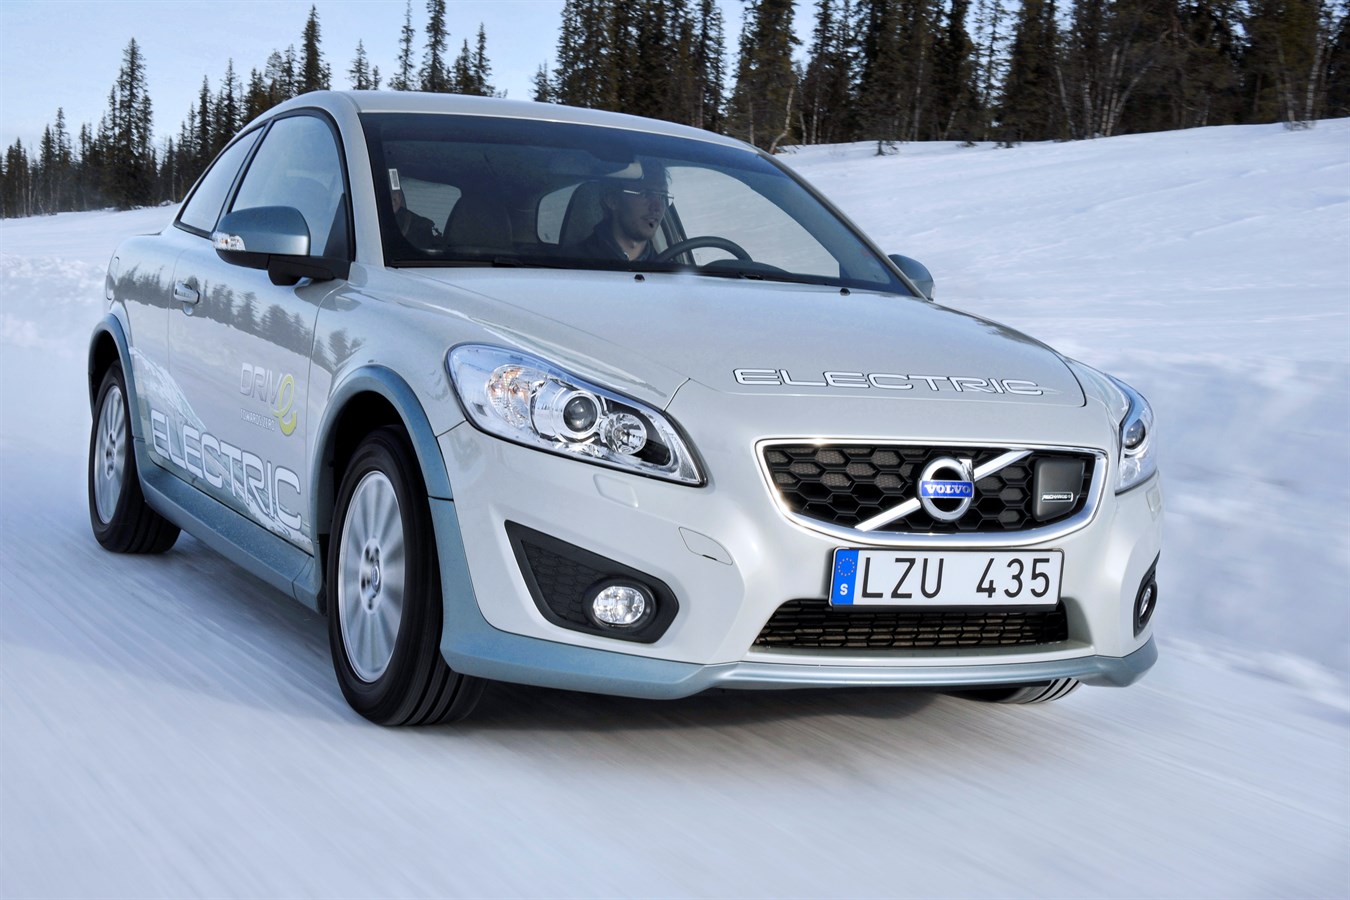 C30 Electric is being tested in winter climate